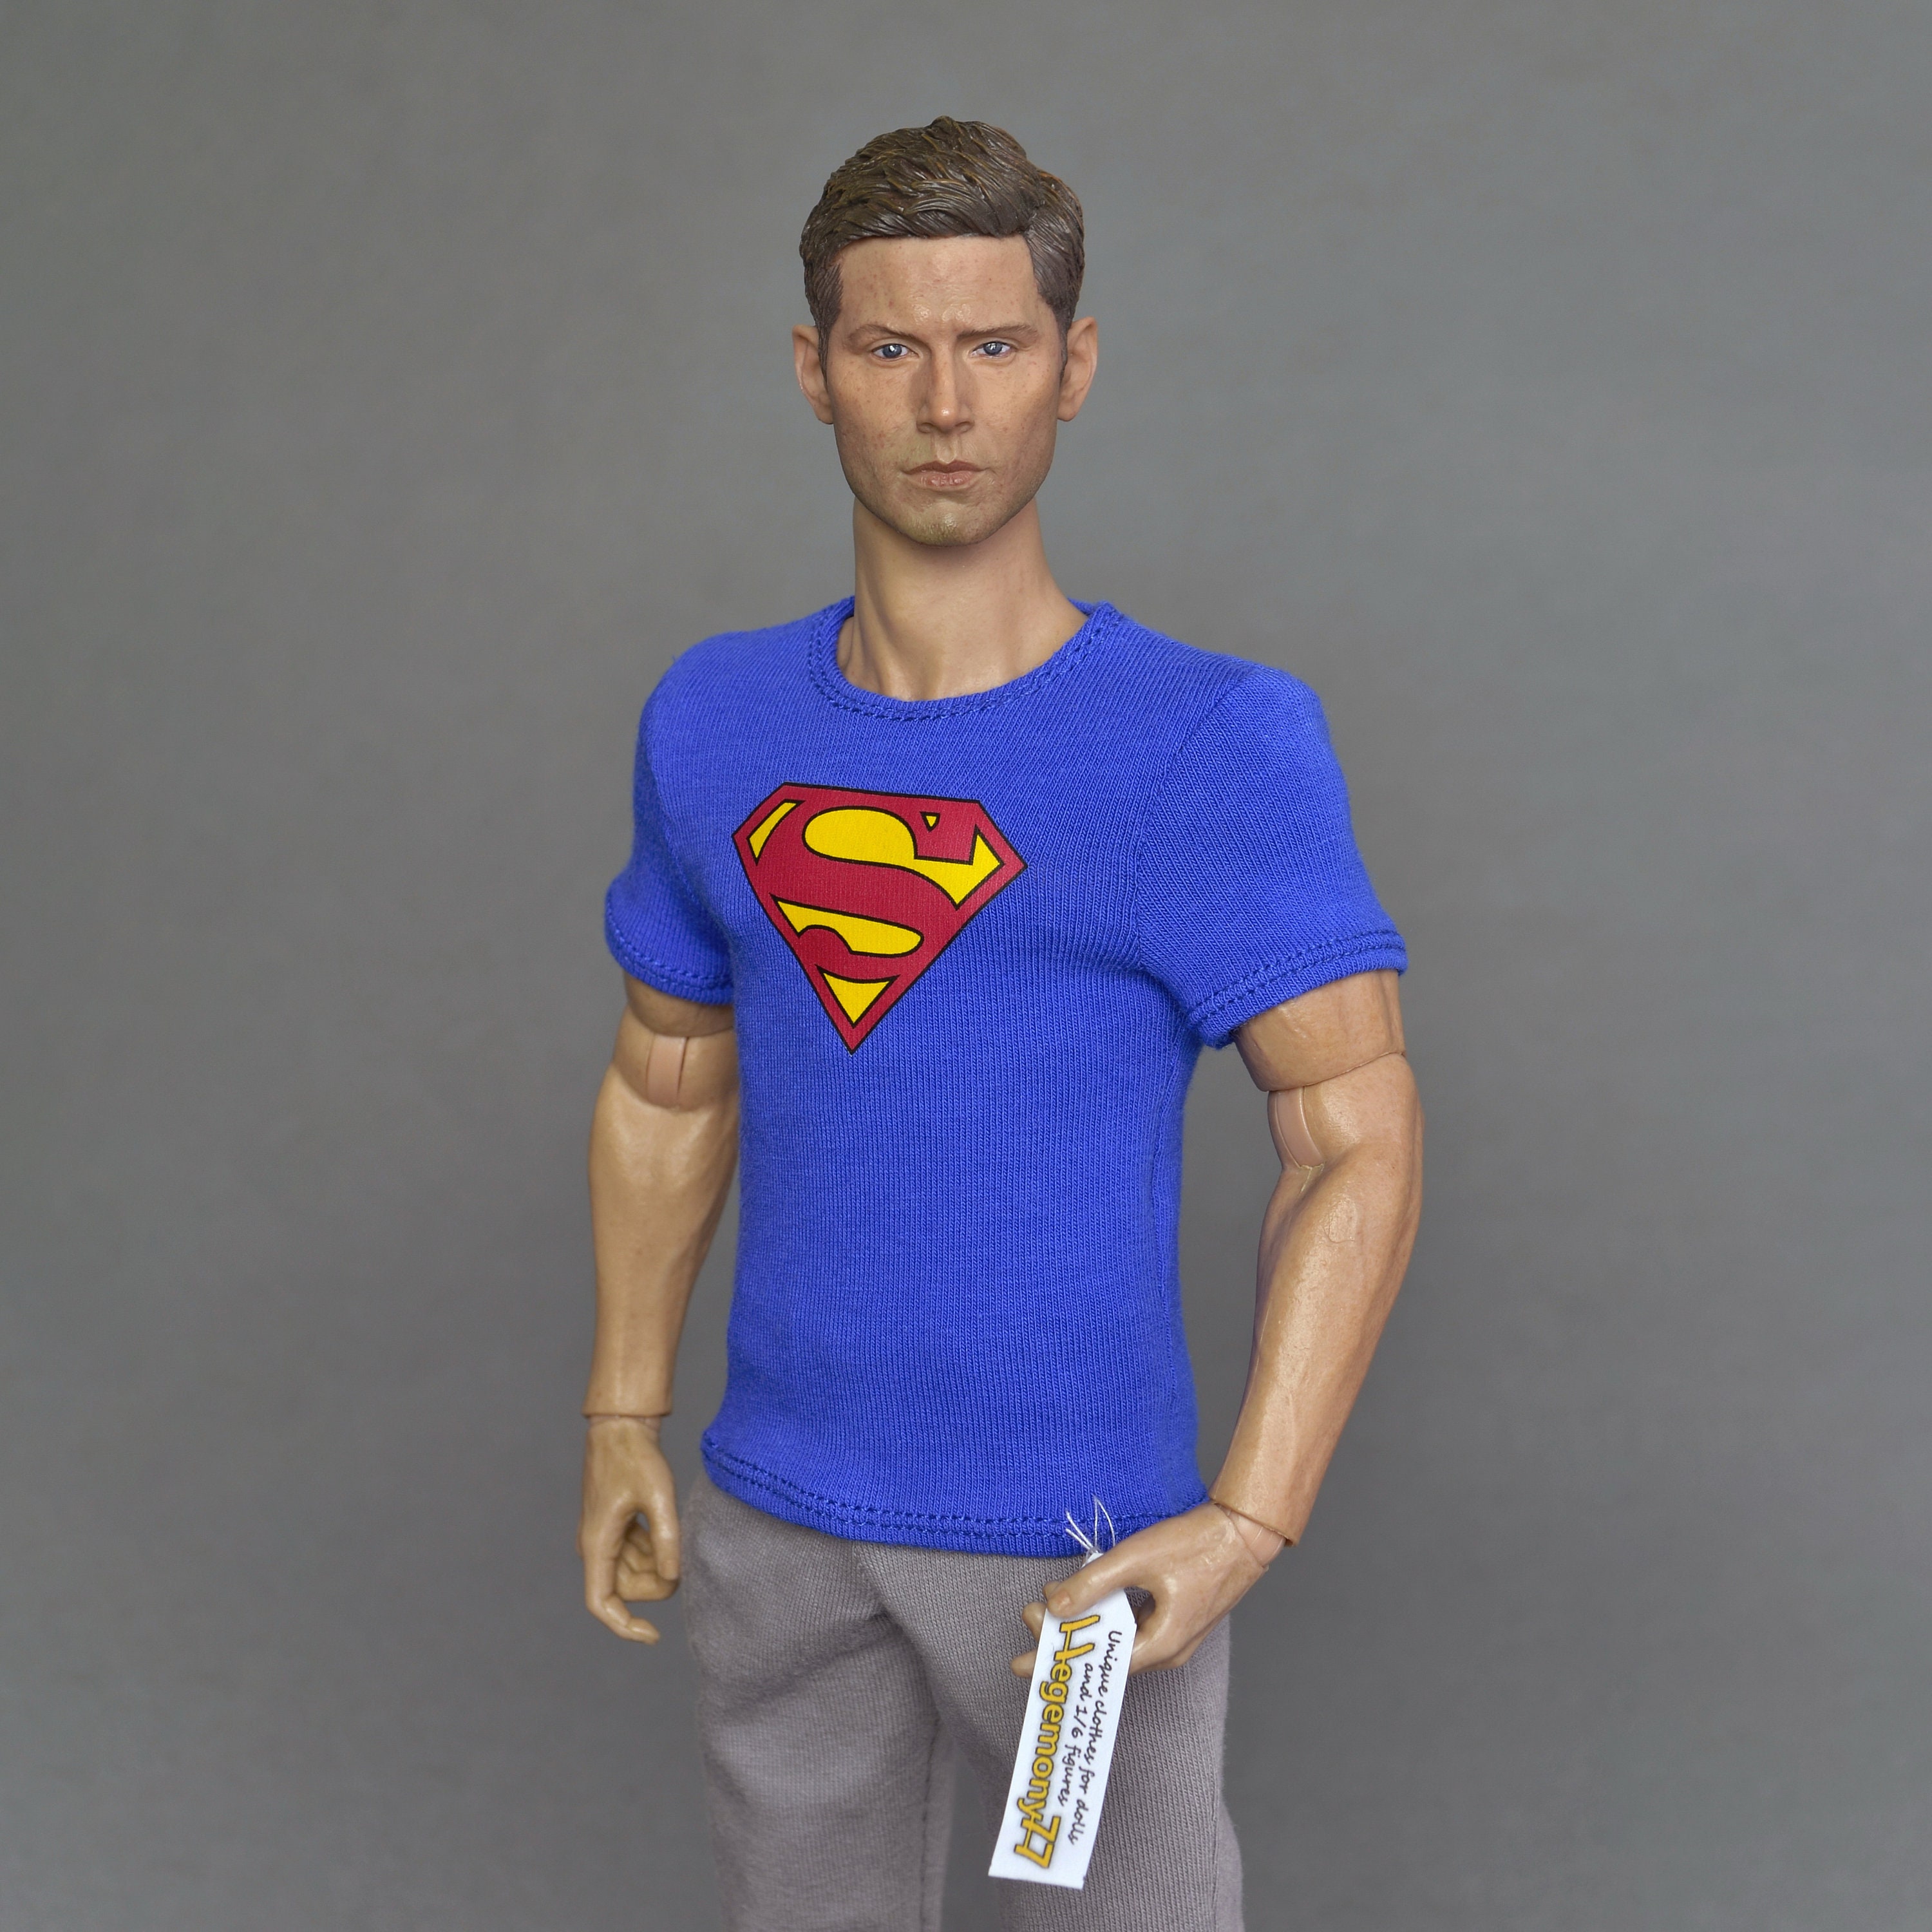 1/6 Scale Royal Blue Superman T-shirt Fits 12 Inch Poseable Figure